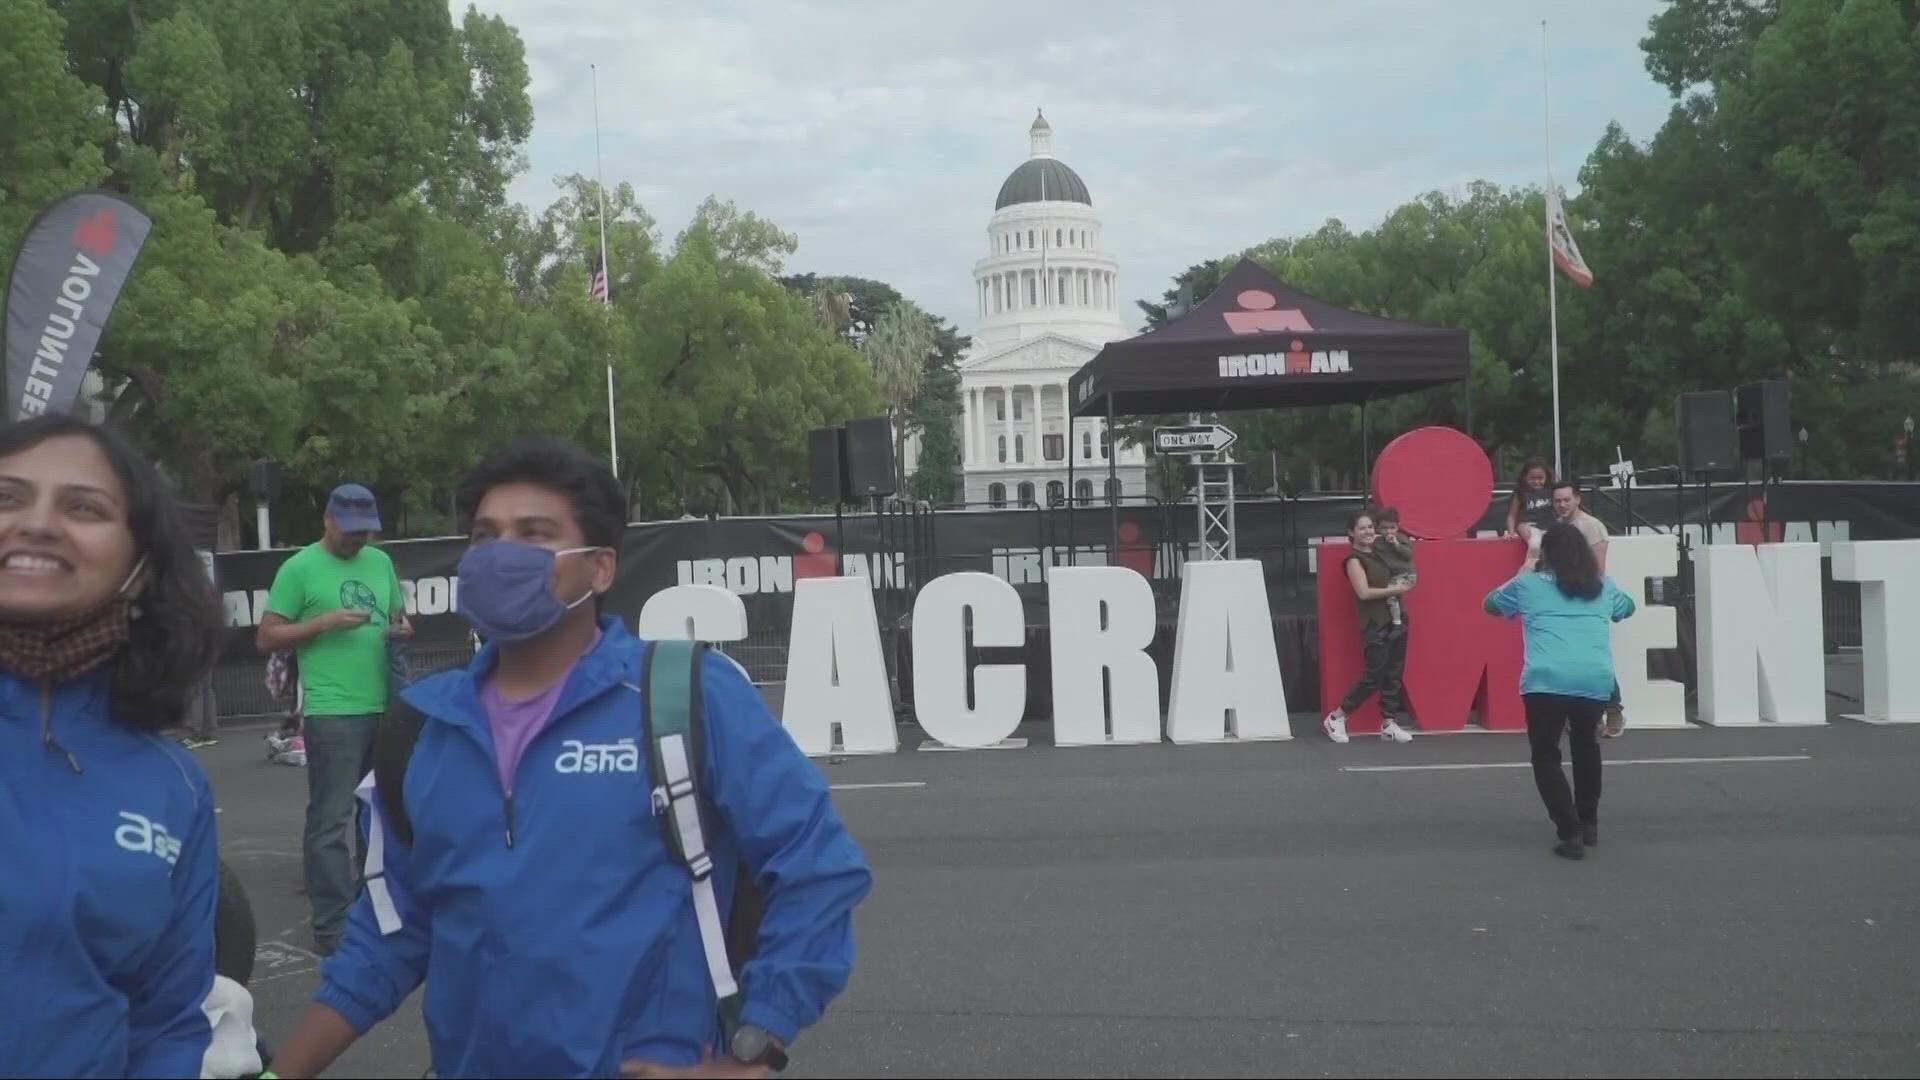 Road closures are set for the race in Sacramento. This year's Iron Man California comes after the event was canceled in 2021 due to severe weather.